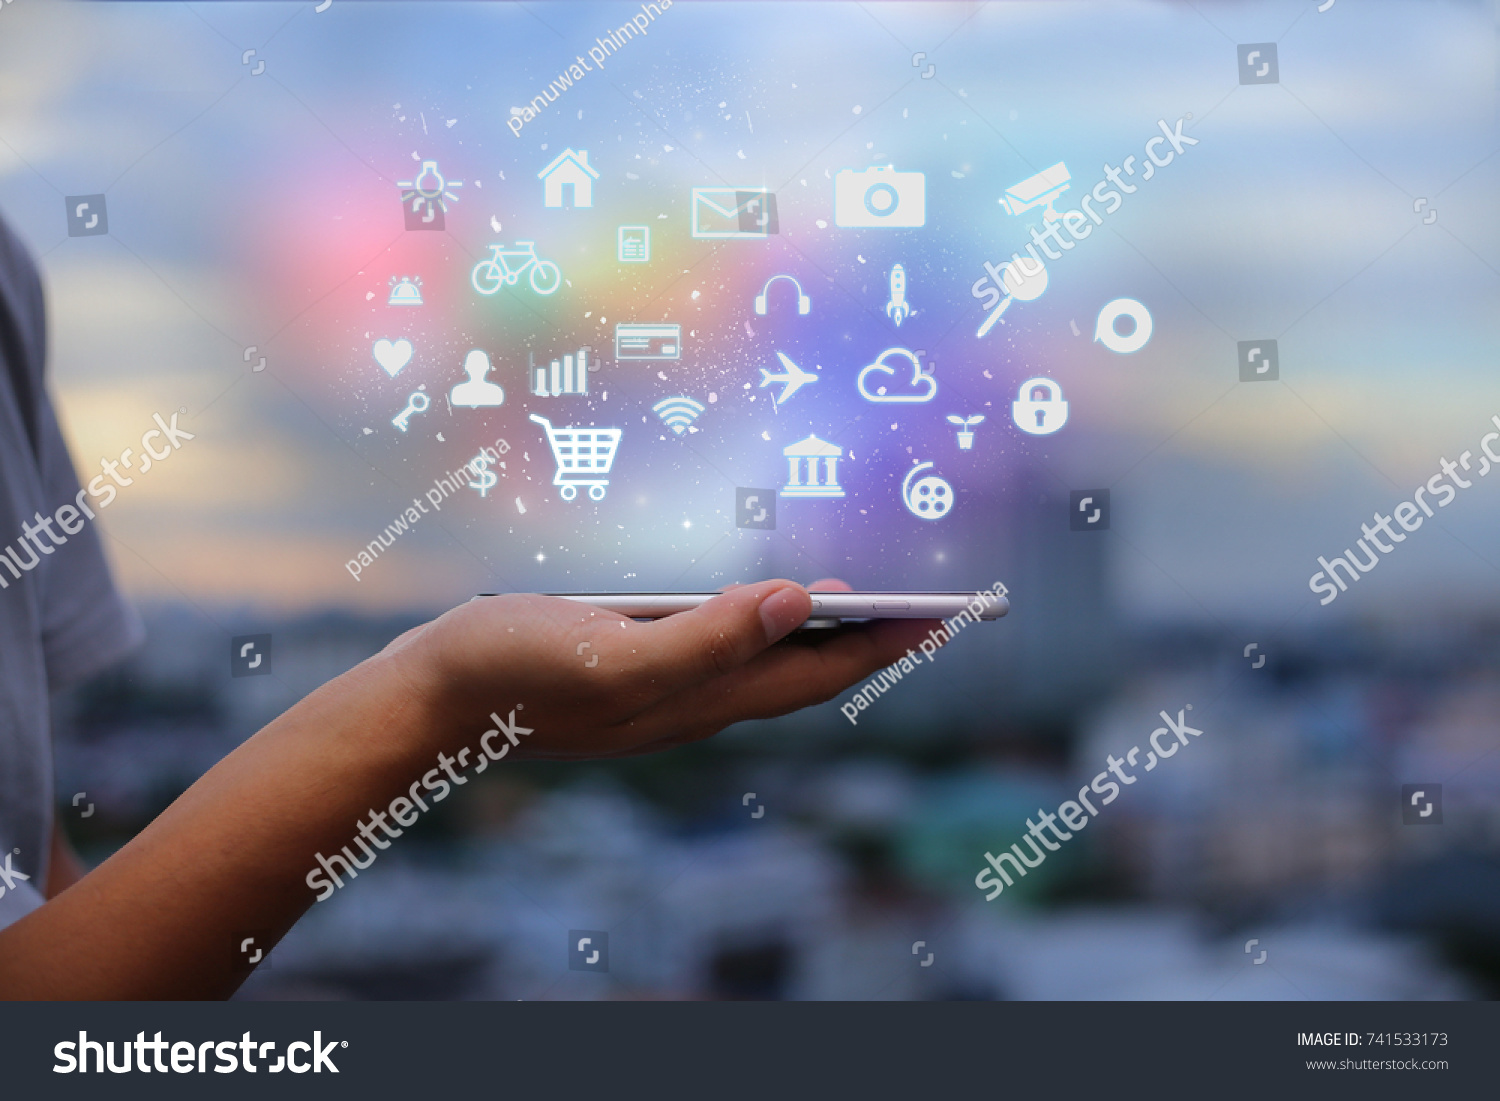 Mobile application concept.Man using touch screen smart phone on blurred urban city background #741533173